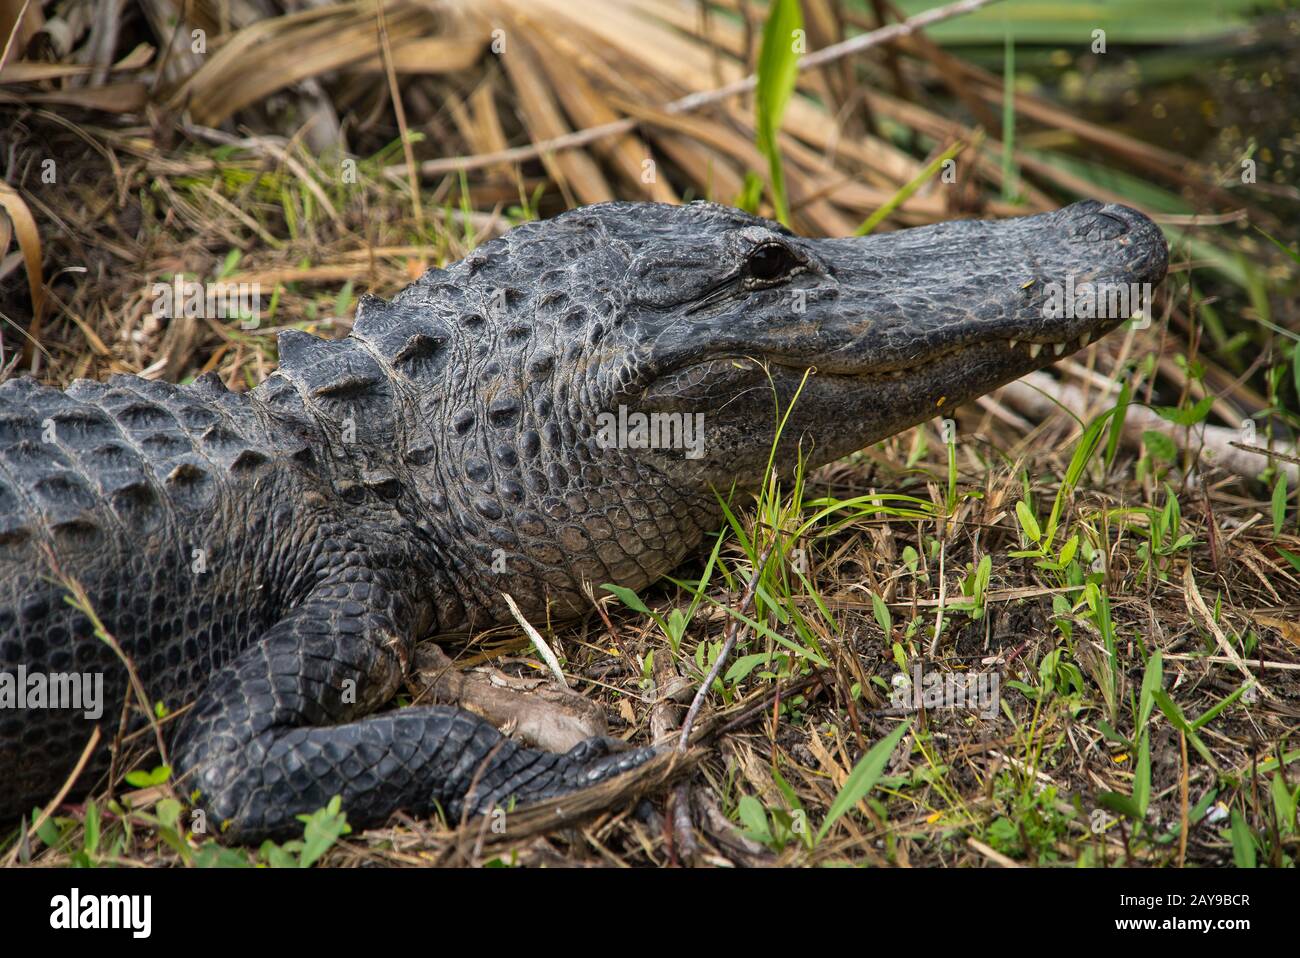 Close-up of an alligator in Everglades Florida Stock Photo